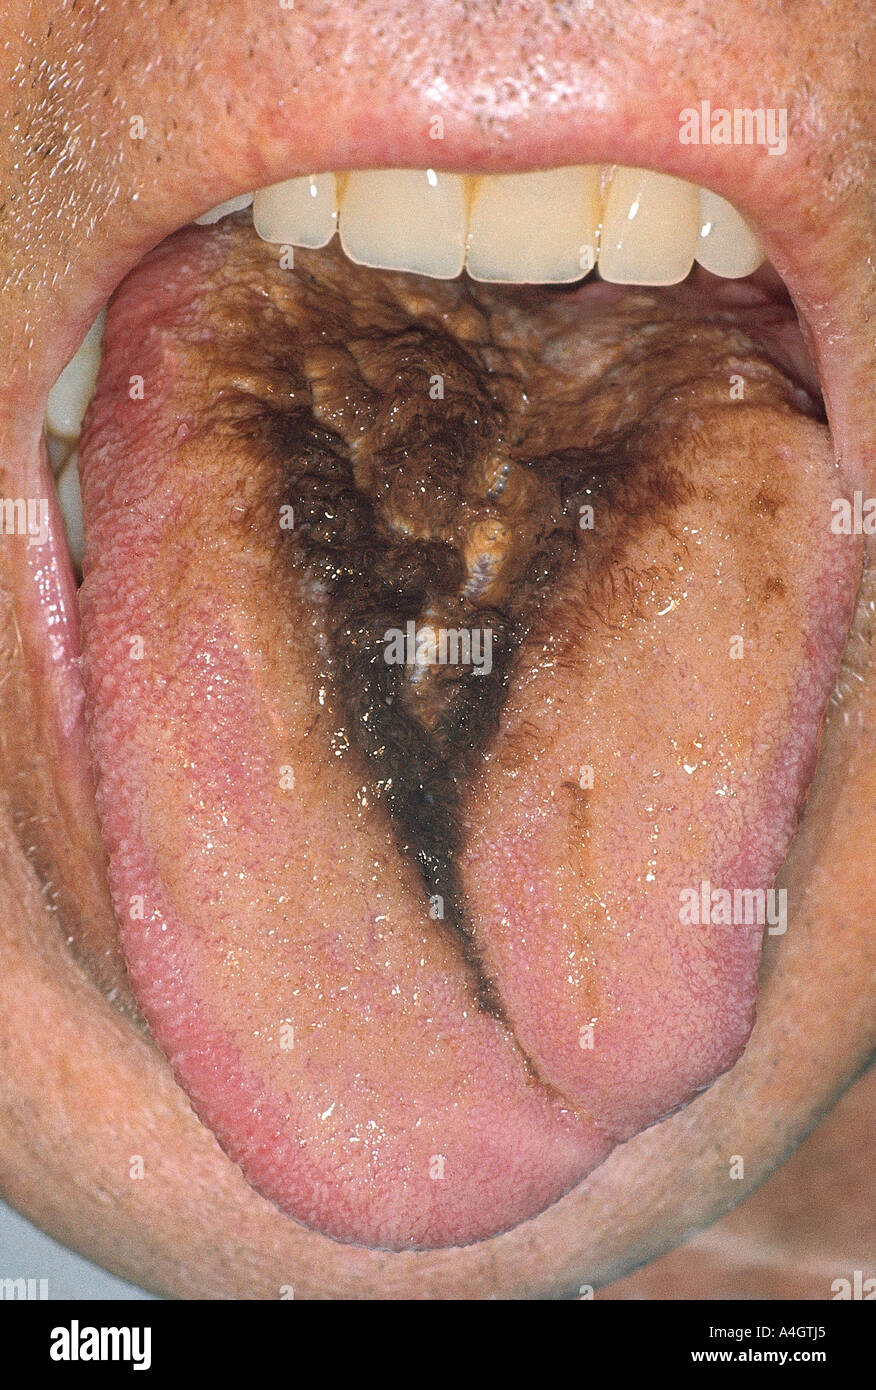 Hairy Tongue Picture 66